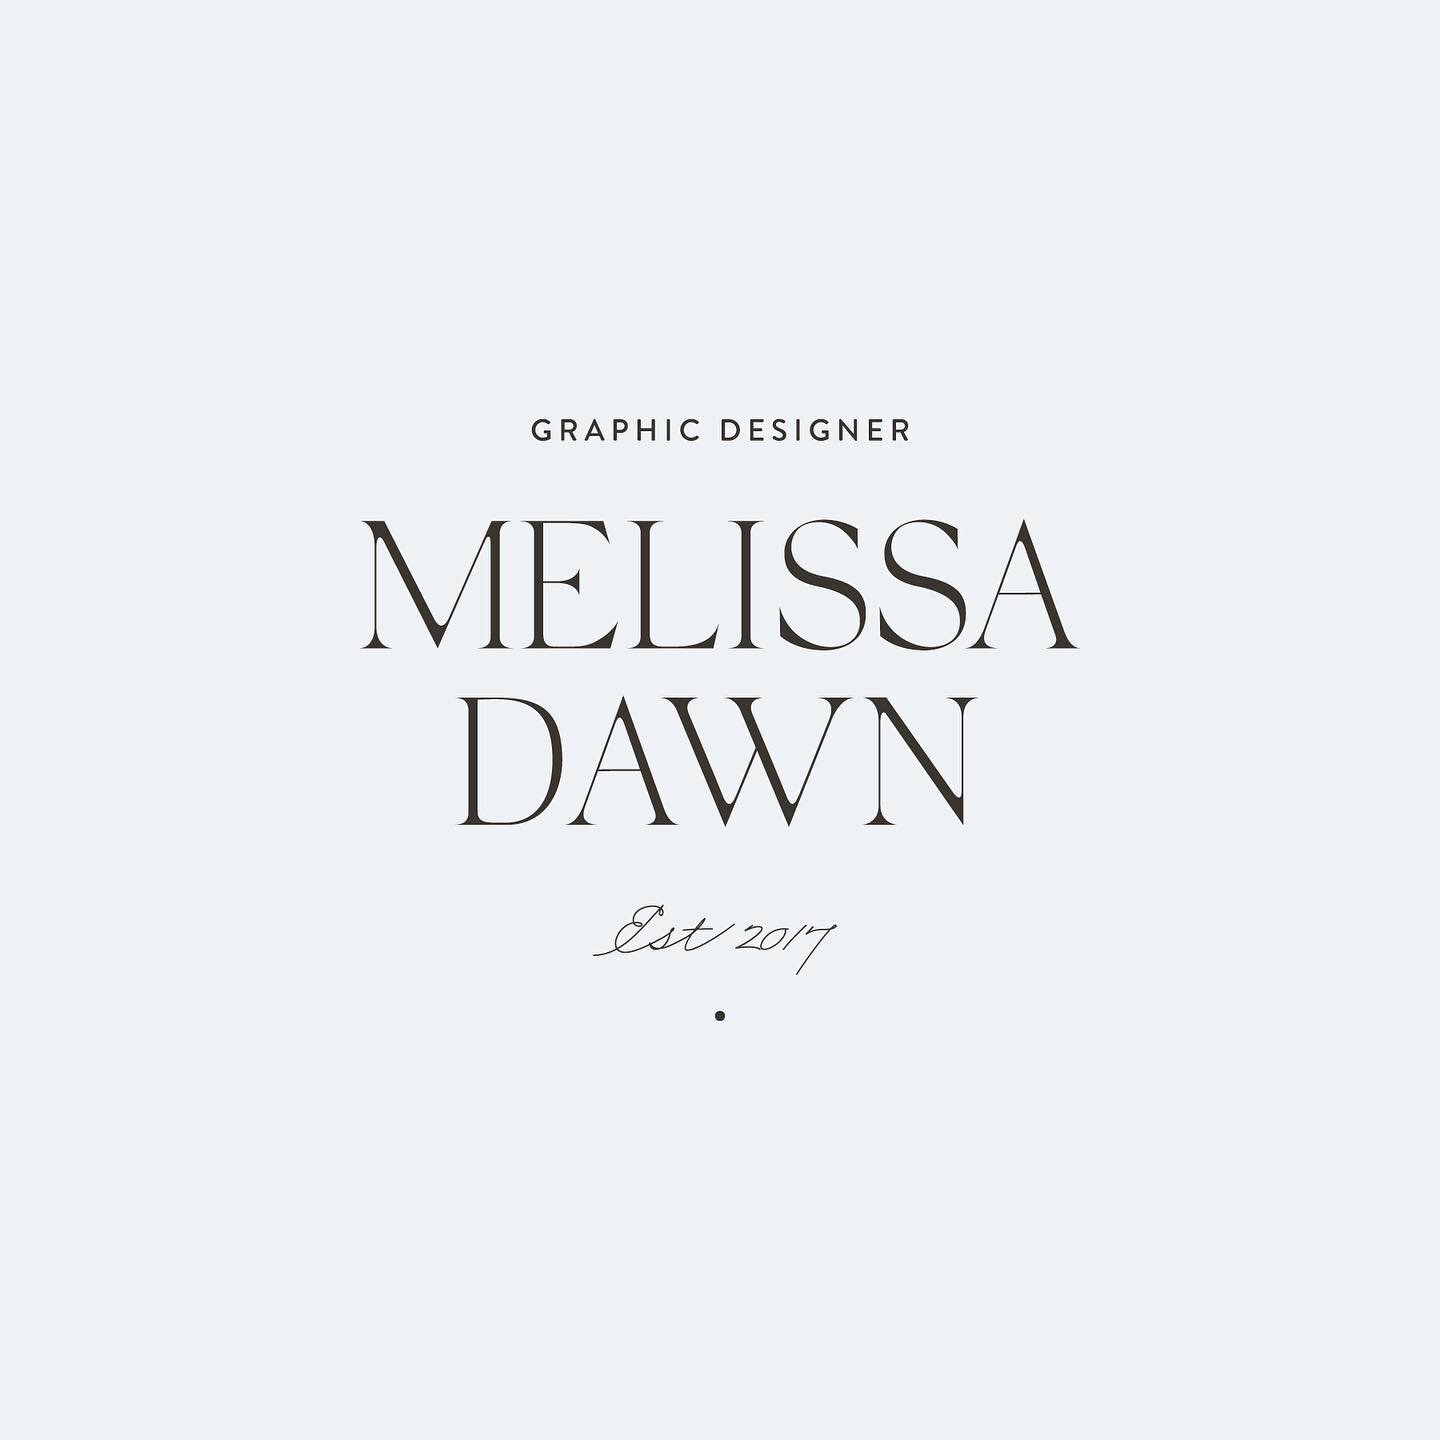 New week, new me✨

It&rsquo;s the beginning of a new week and what better time to share that Melissa Dawn has a new look! I&rsquo;ve been working hard behind the scenes (between changing diapers and feeding my son) to do something just FOR ME. 

My o